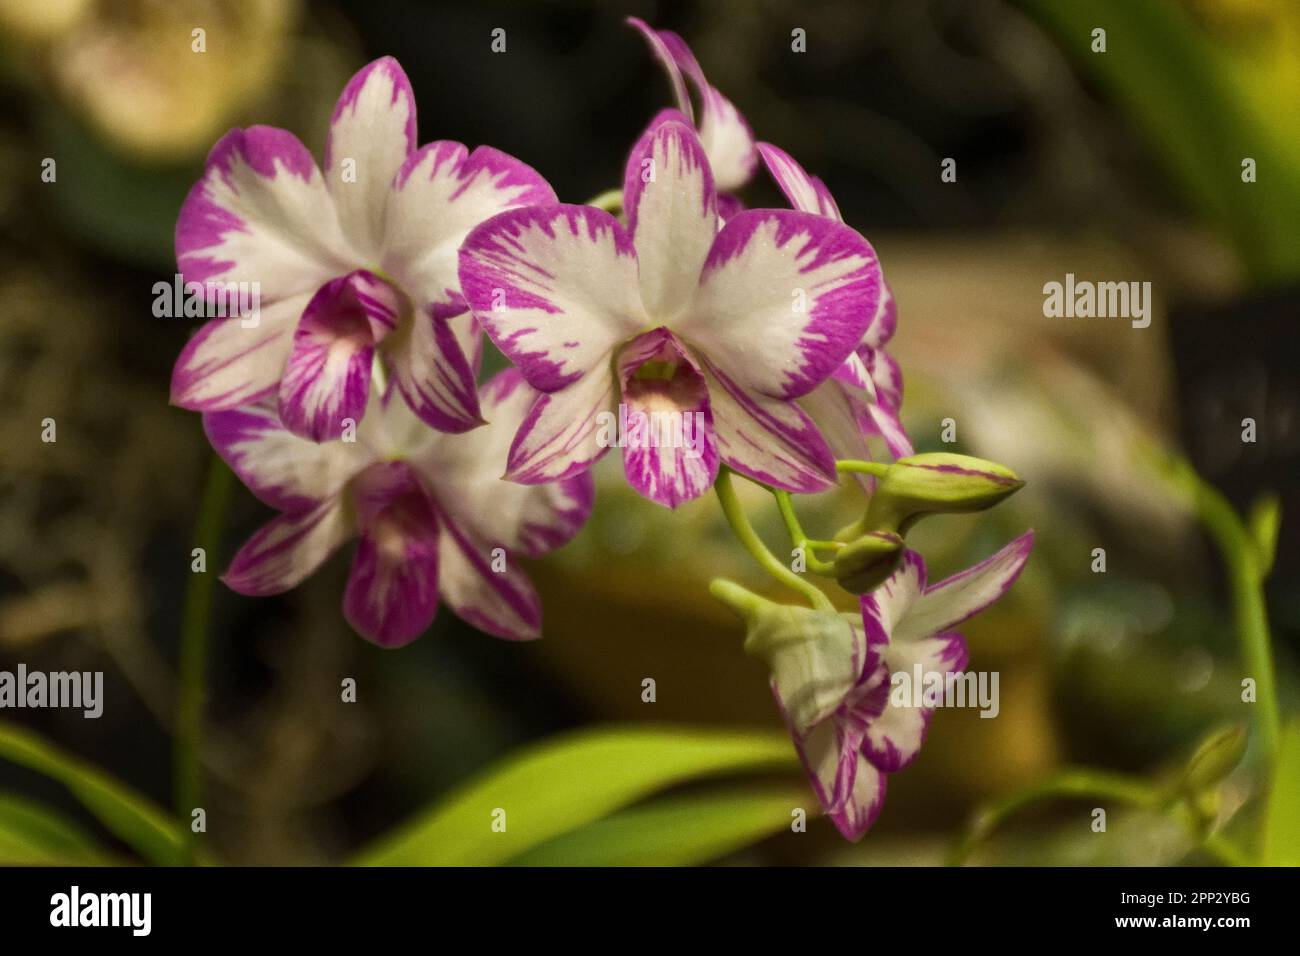 Elegant tropical orchid flowers with white and pink petals bloom in autumn for decoration Stock Photo